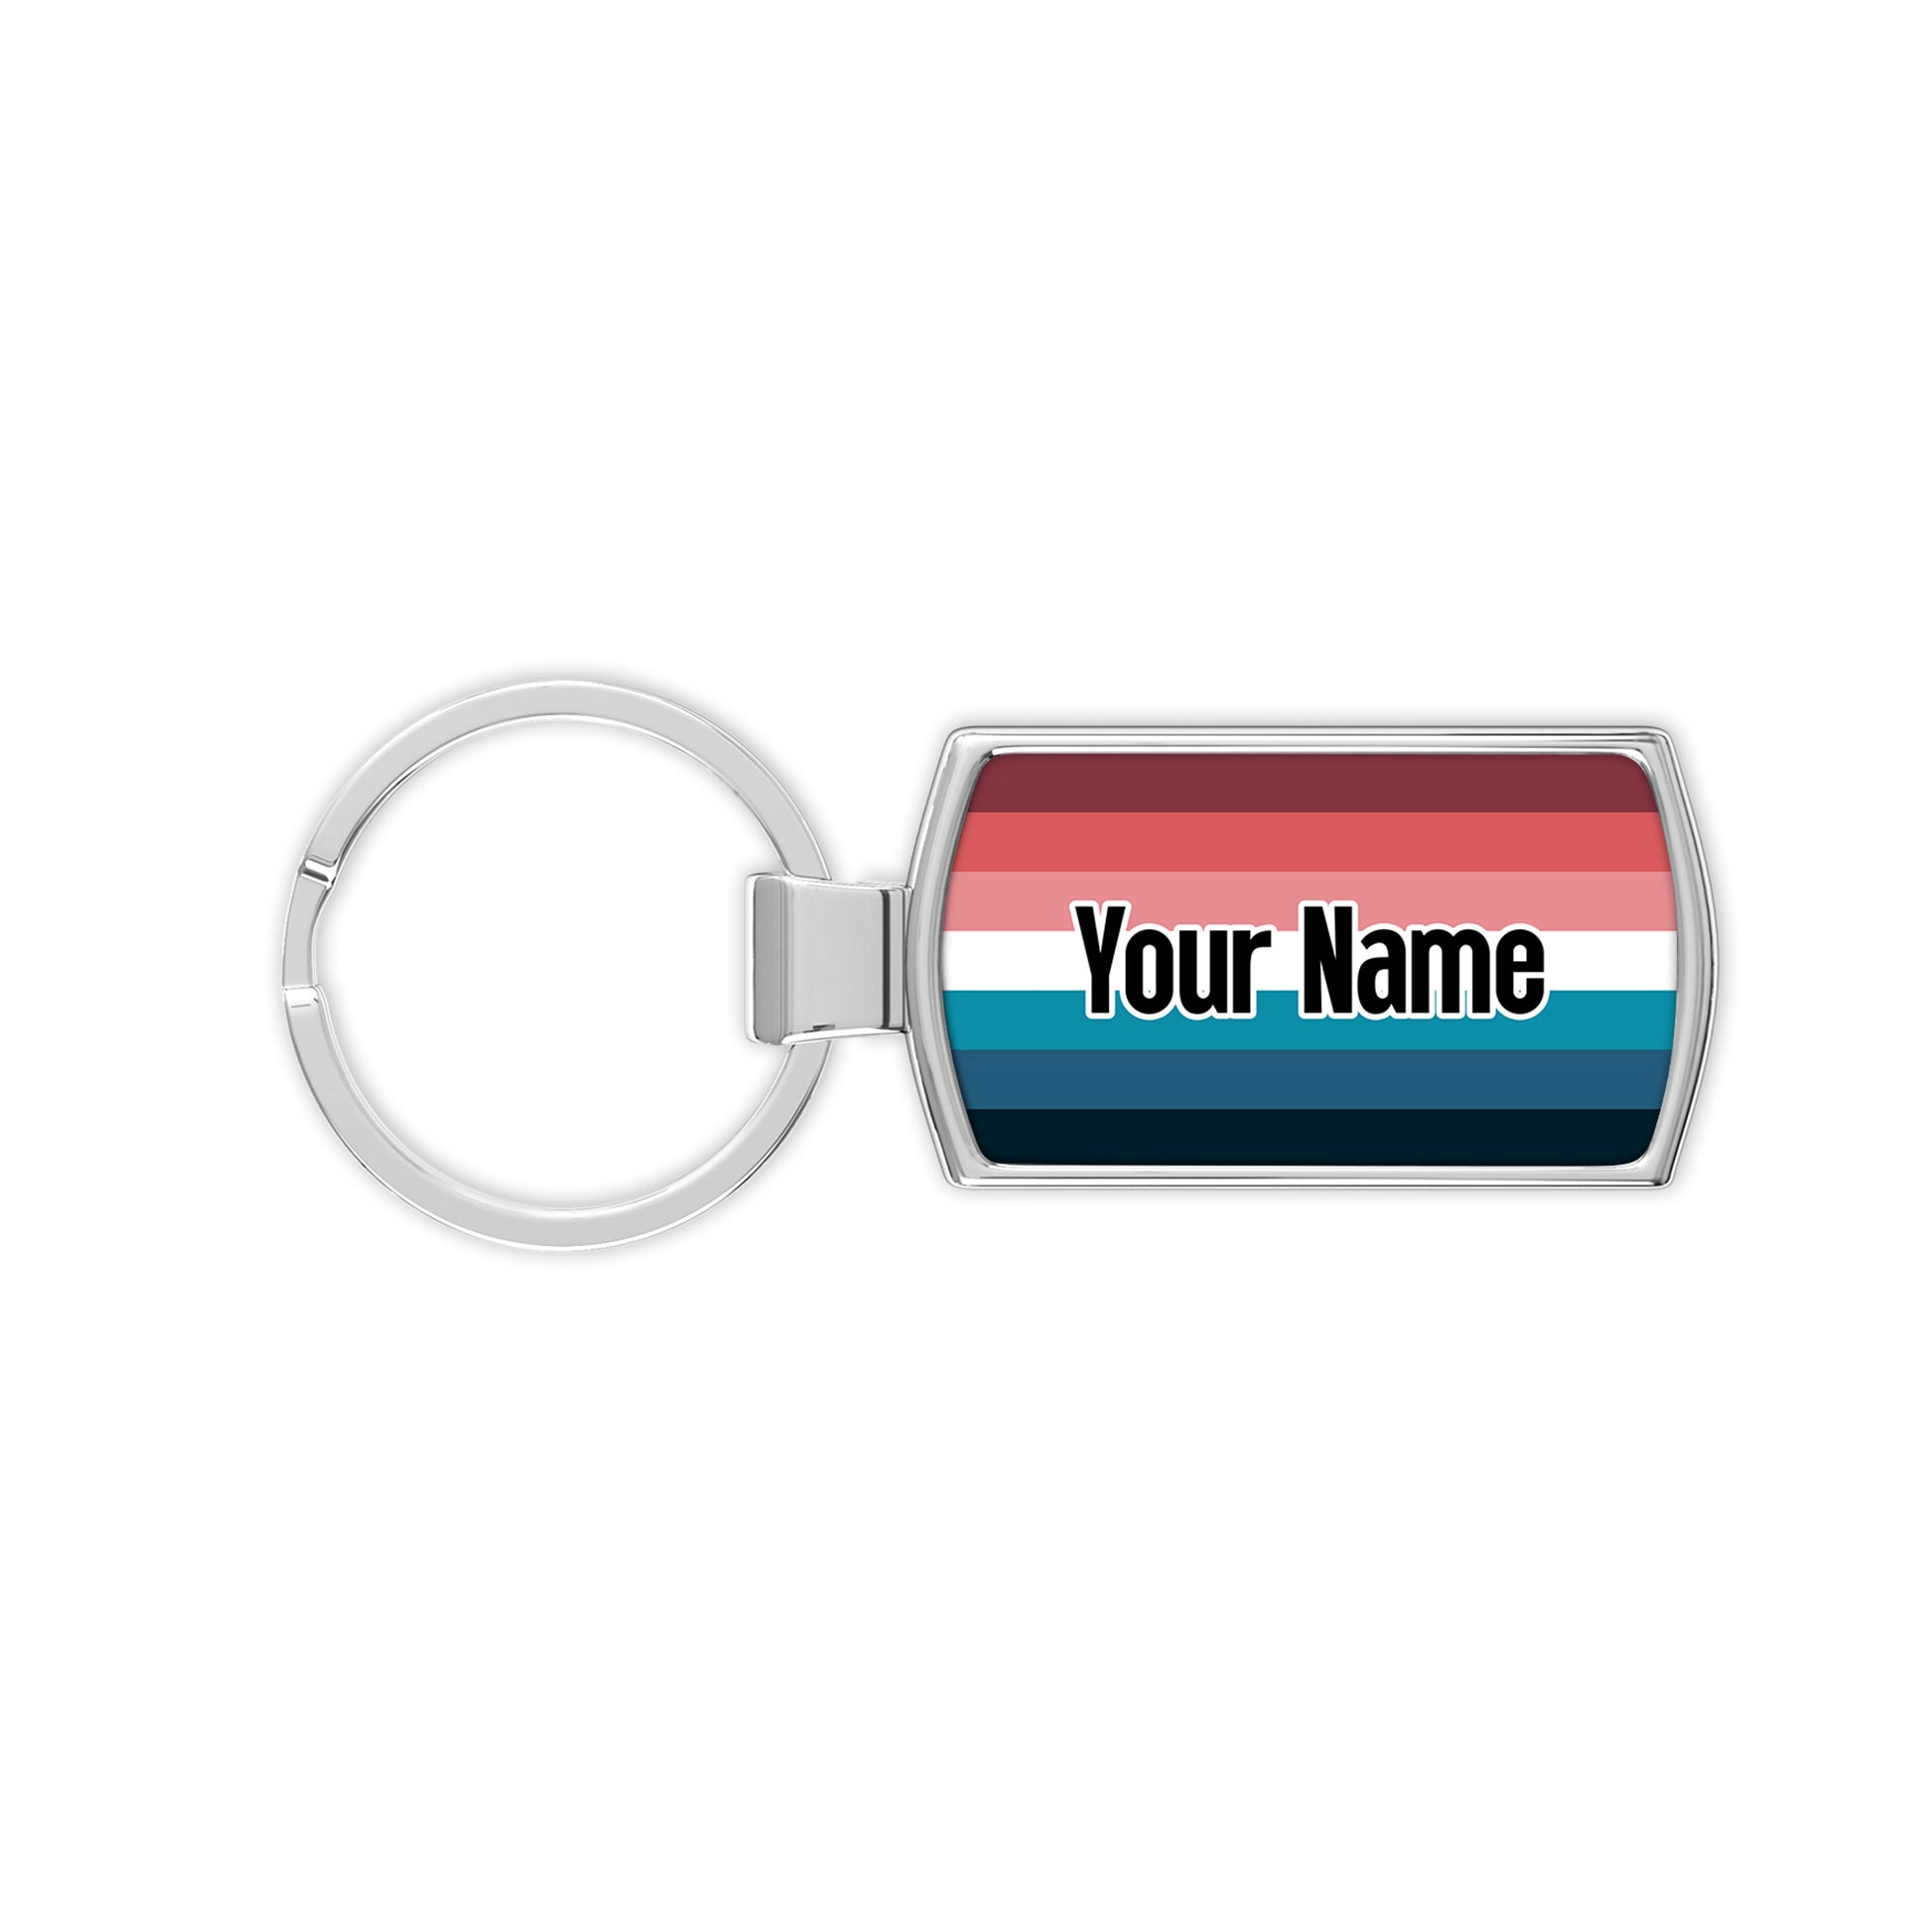 Nebularomantic pride flag metal keyring that comes personalised with your name